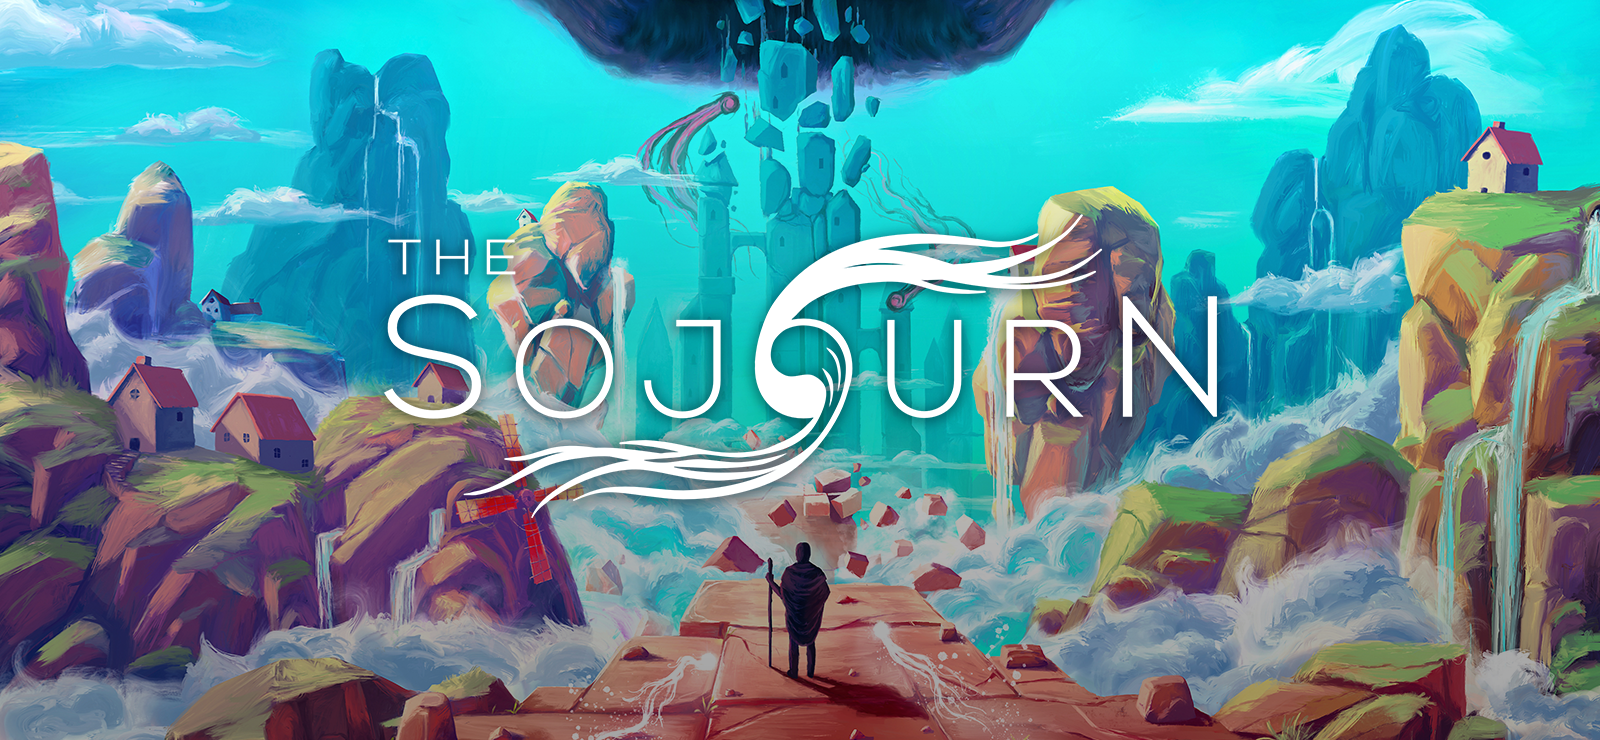 The Sojourn - Upgrade To Digital Deluxe